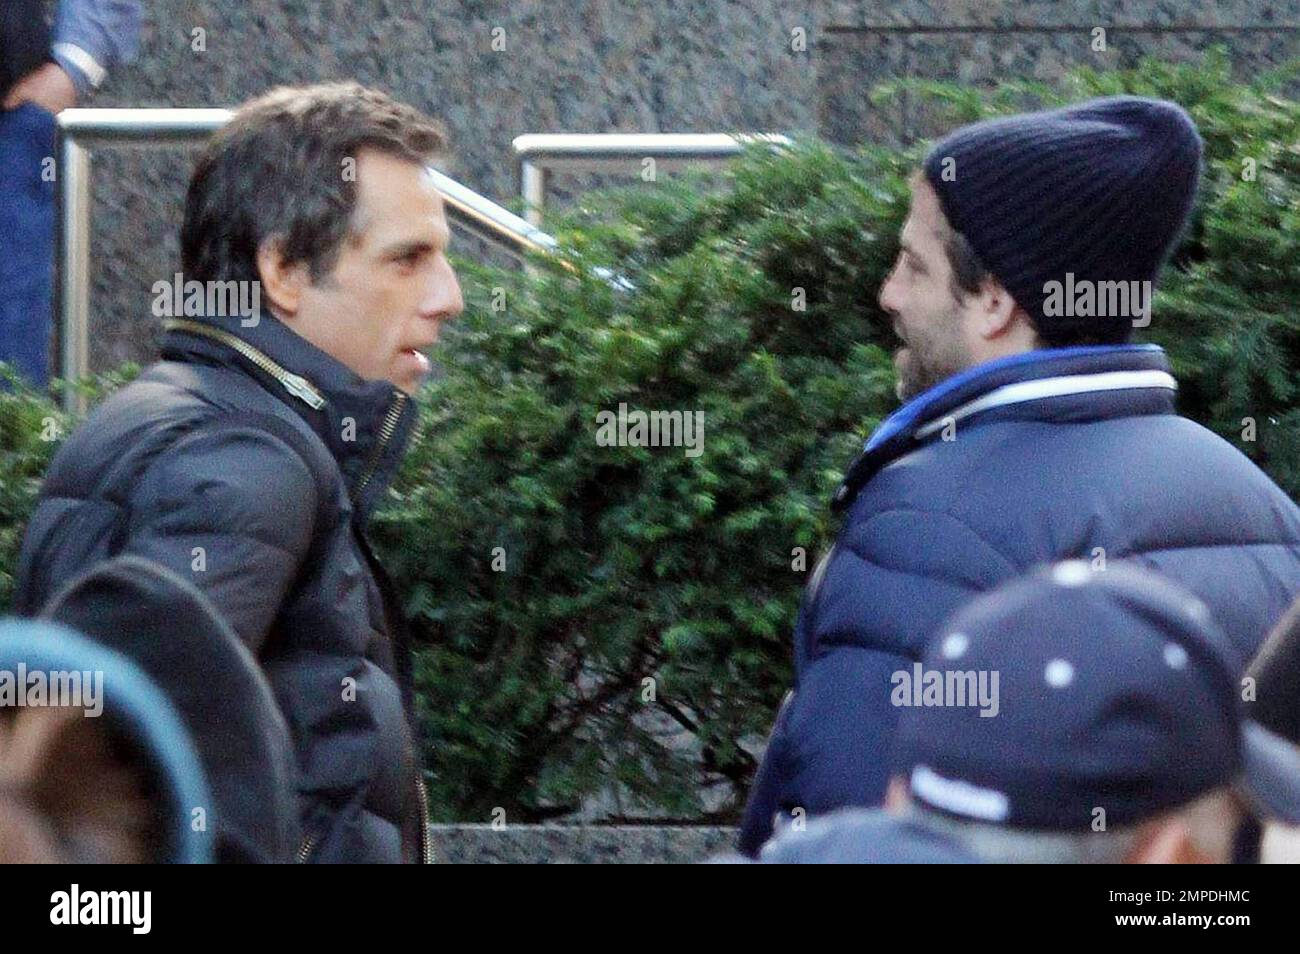 Actor Ben Stiller on the set of 'Tower Heist' directed by Brett Ratner and co-starring Eddie Murphy, Casey Affleck and TŽa Leoni. New York, NY. 11/10/10. Stock Photo